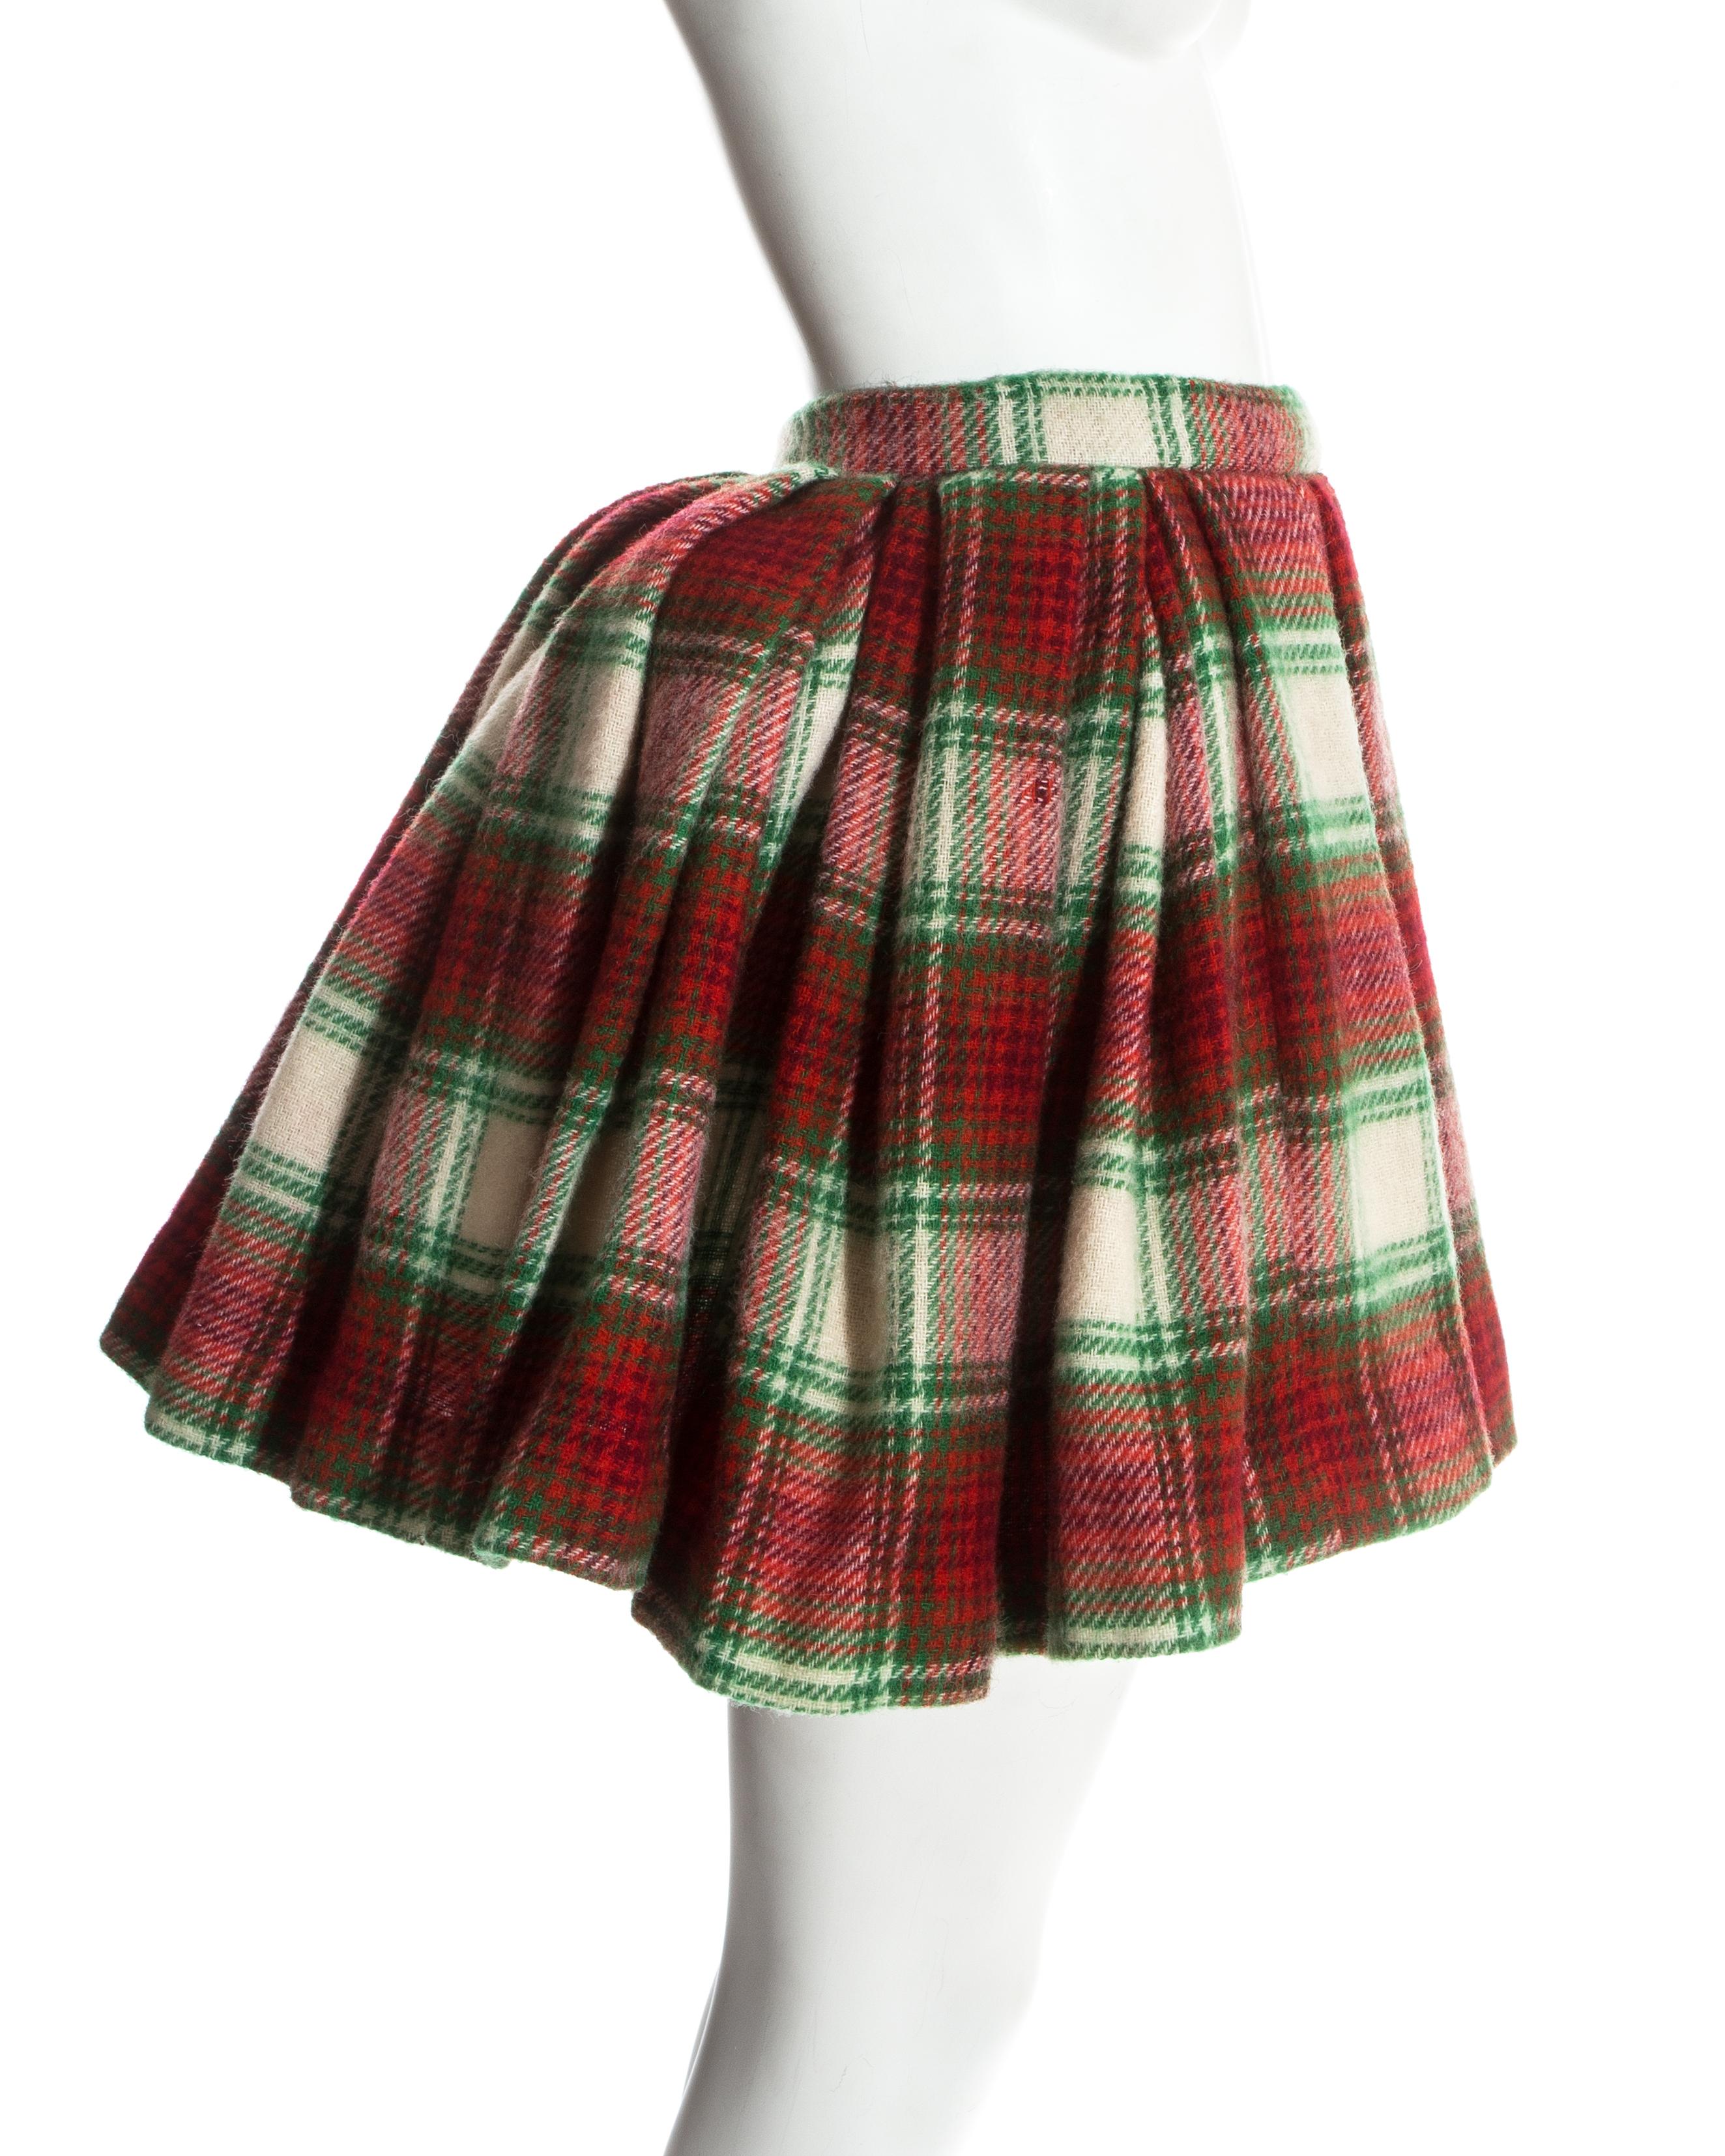 Vivienne Westwood red tartan wool pleated skirt. Inside are the four original safety pin attached padded balls which were used in the show to exaggerated the rear; as a bustle would do. 

Time Machine, Fall-Winter 1988